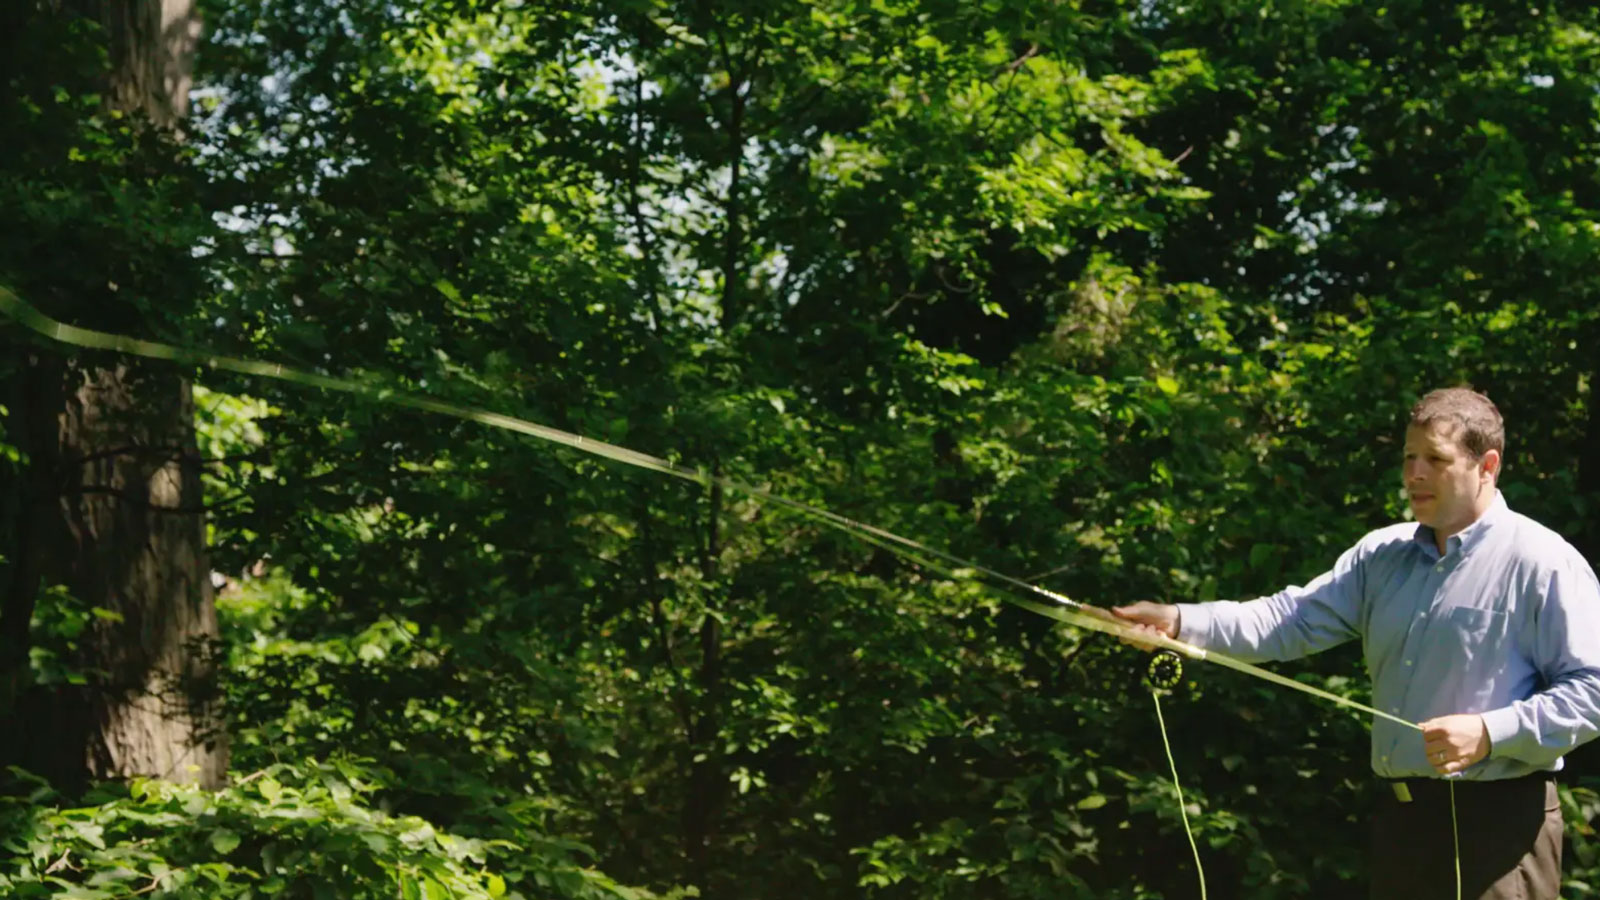 Ricky Lapidus, dean of faculty, demonstrates fly fishing